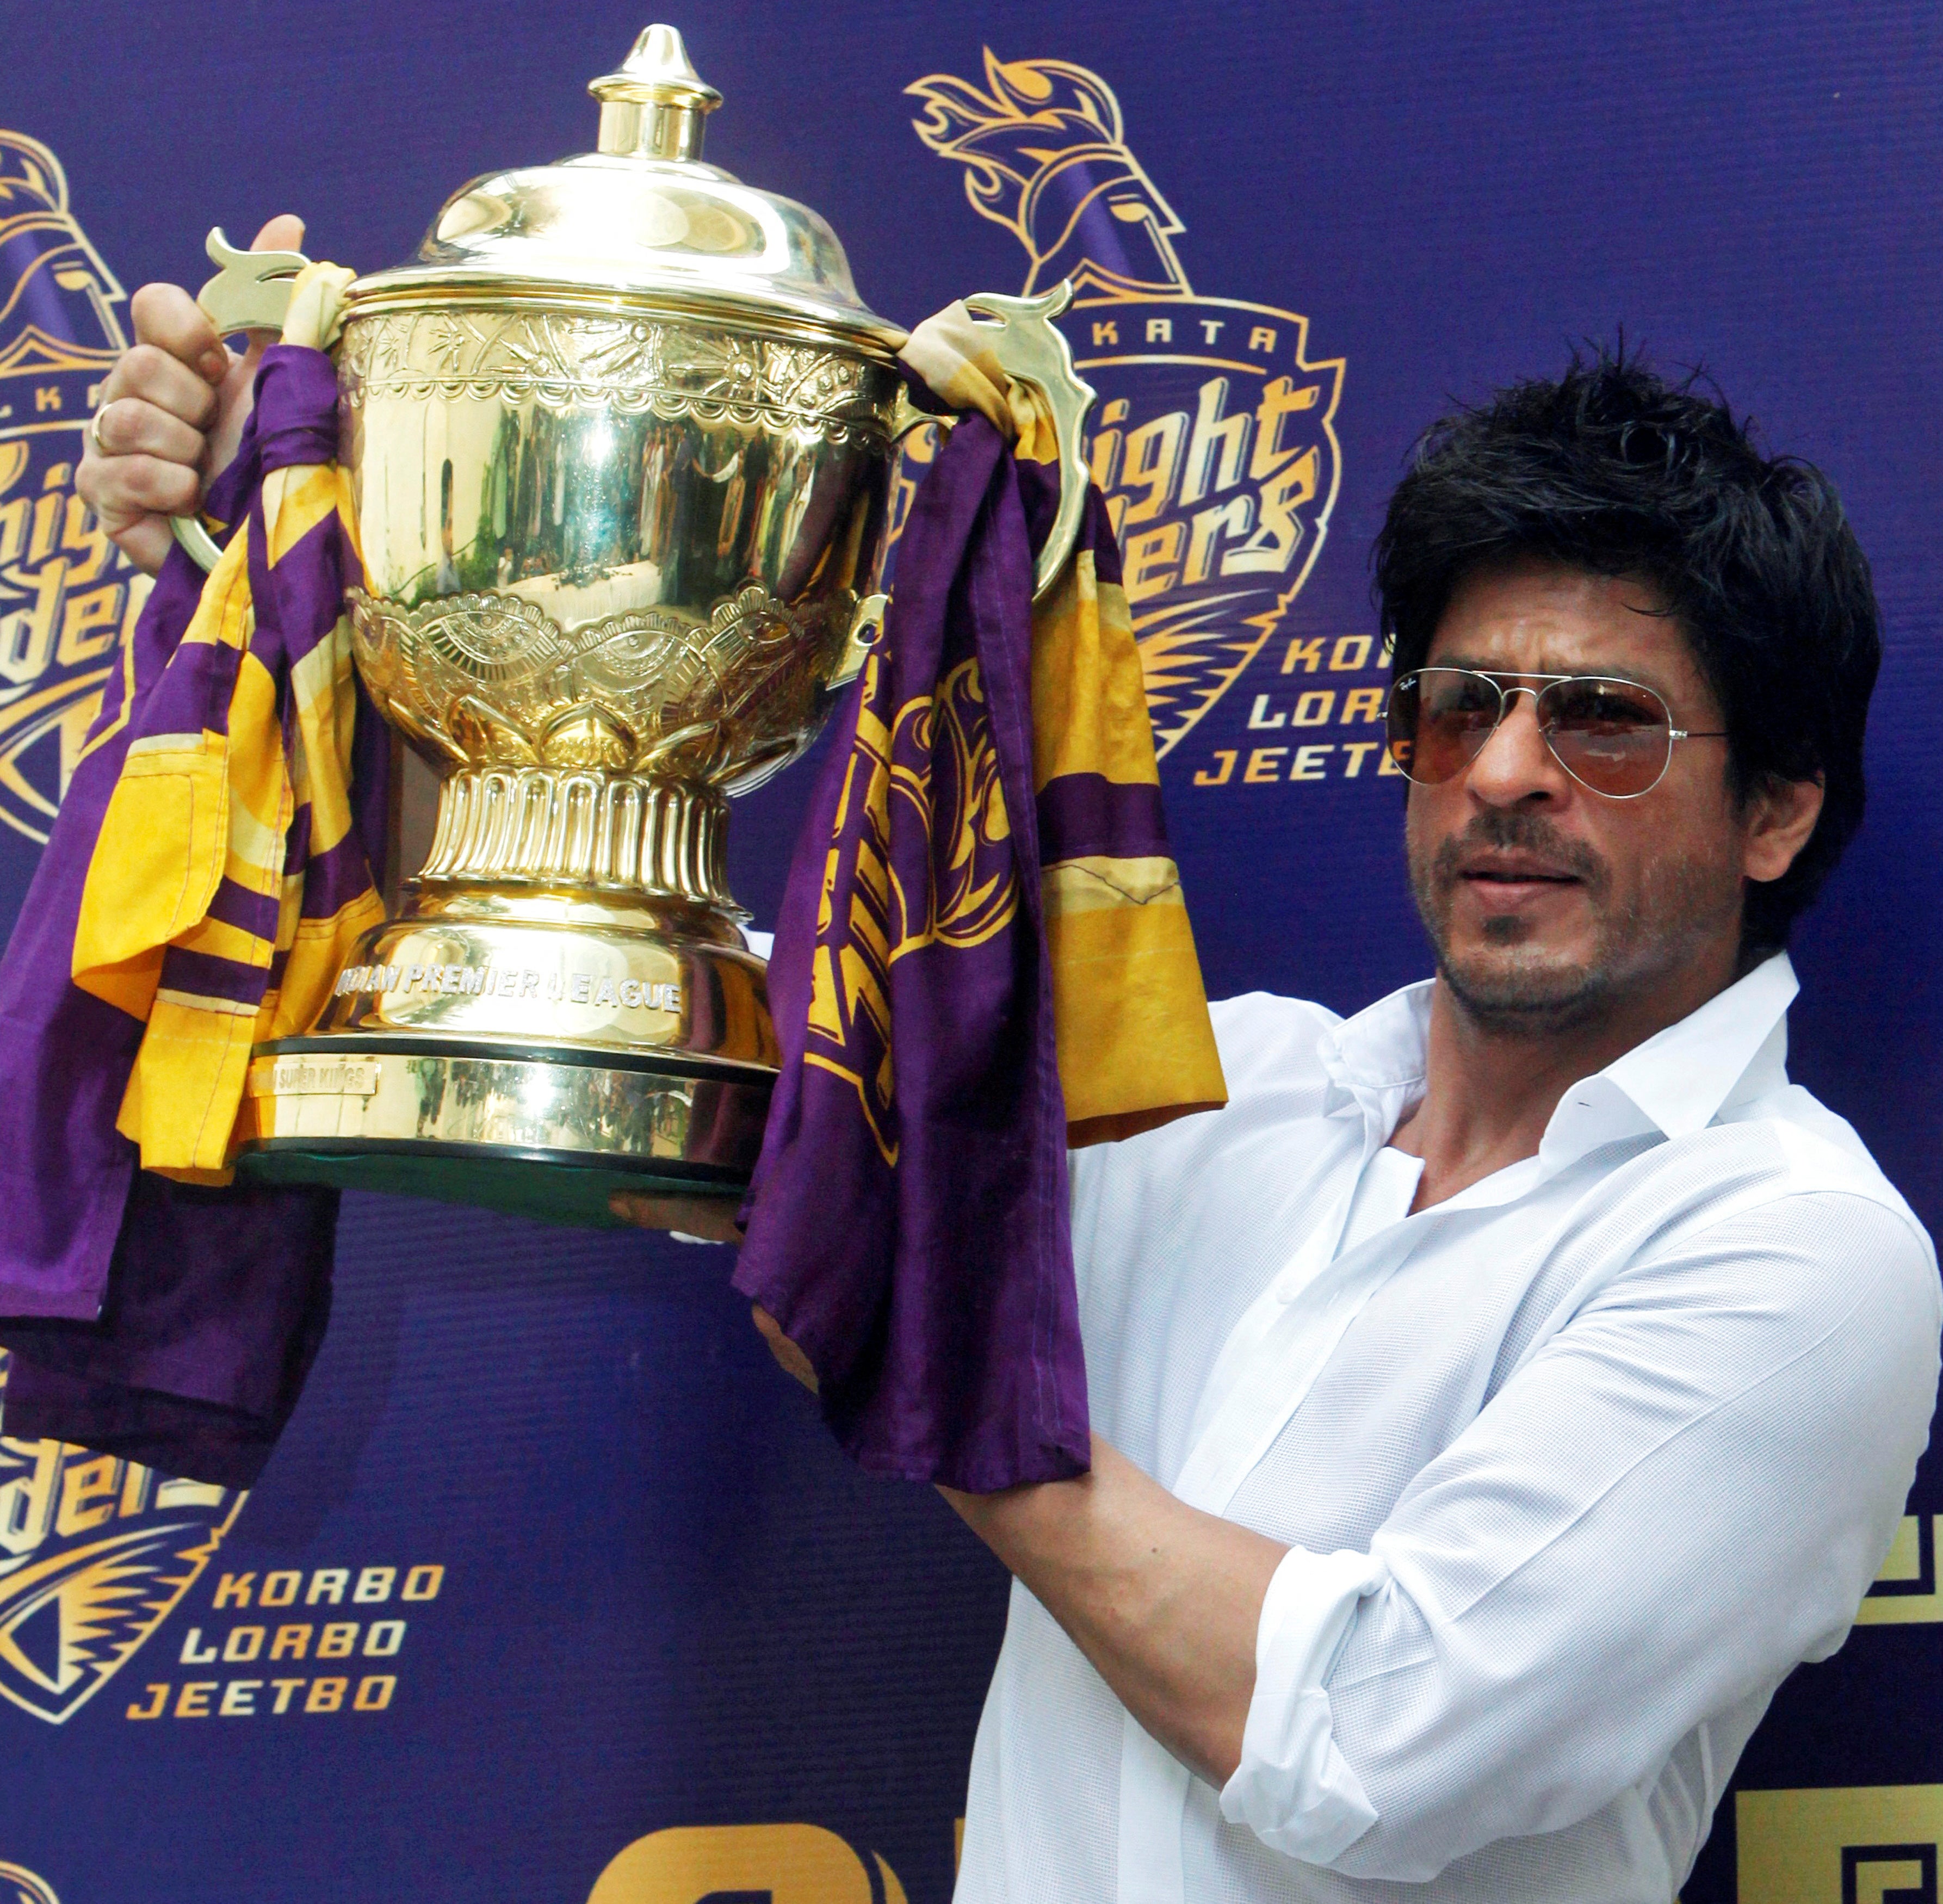 Bollywood actor Shah Rukh Khan displays the Indian Premier League (IPL) cricket trophy during a news conference at his residence in Mumbai